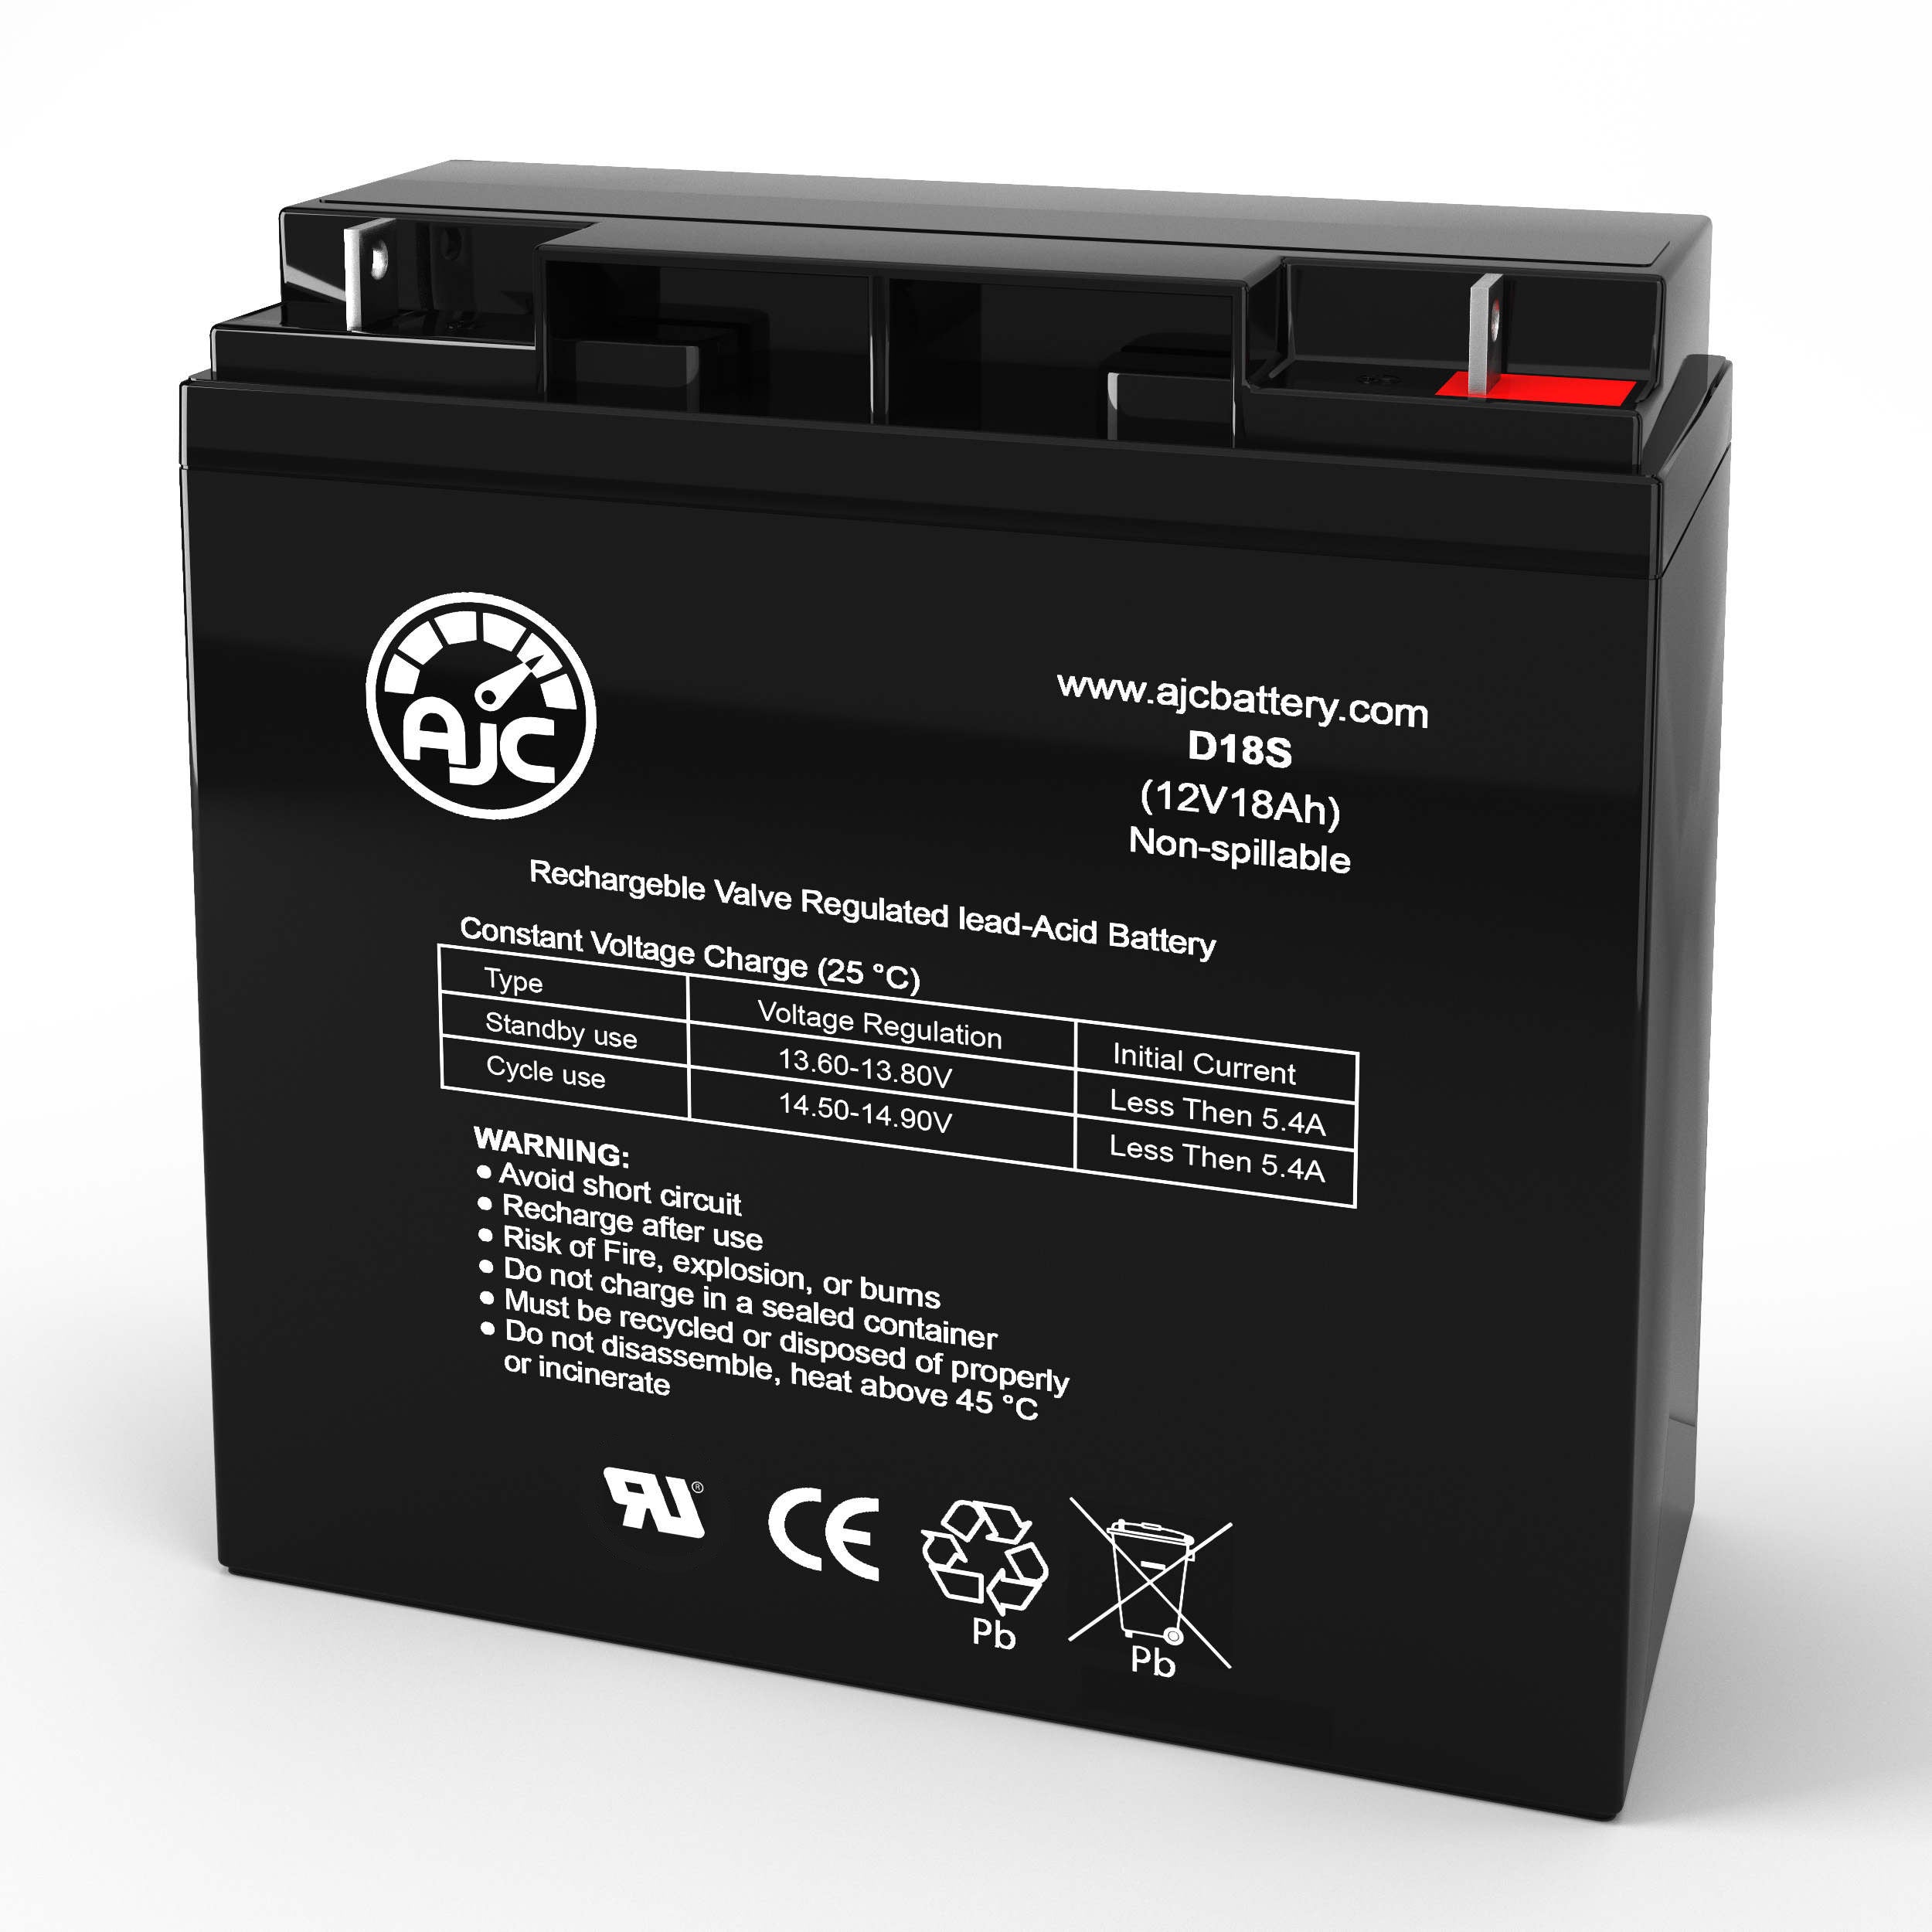 Stanley J5C09 500 Amp 12V 18Ah Jump Starter Battery - This Is an AJC Brand Replacement - image 1 of 6